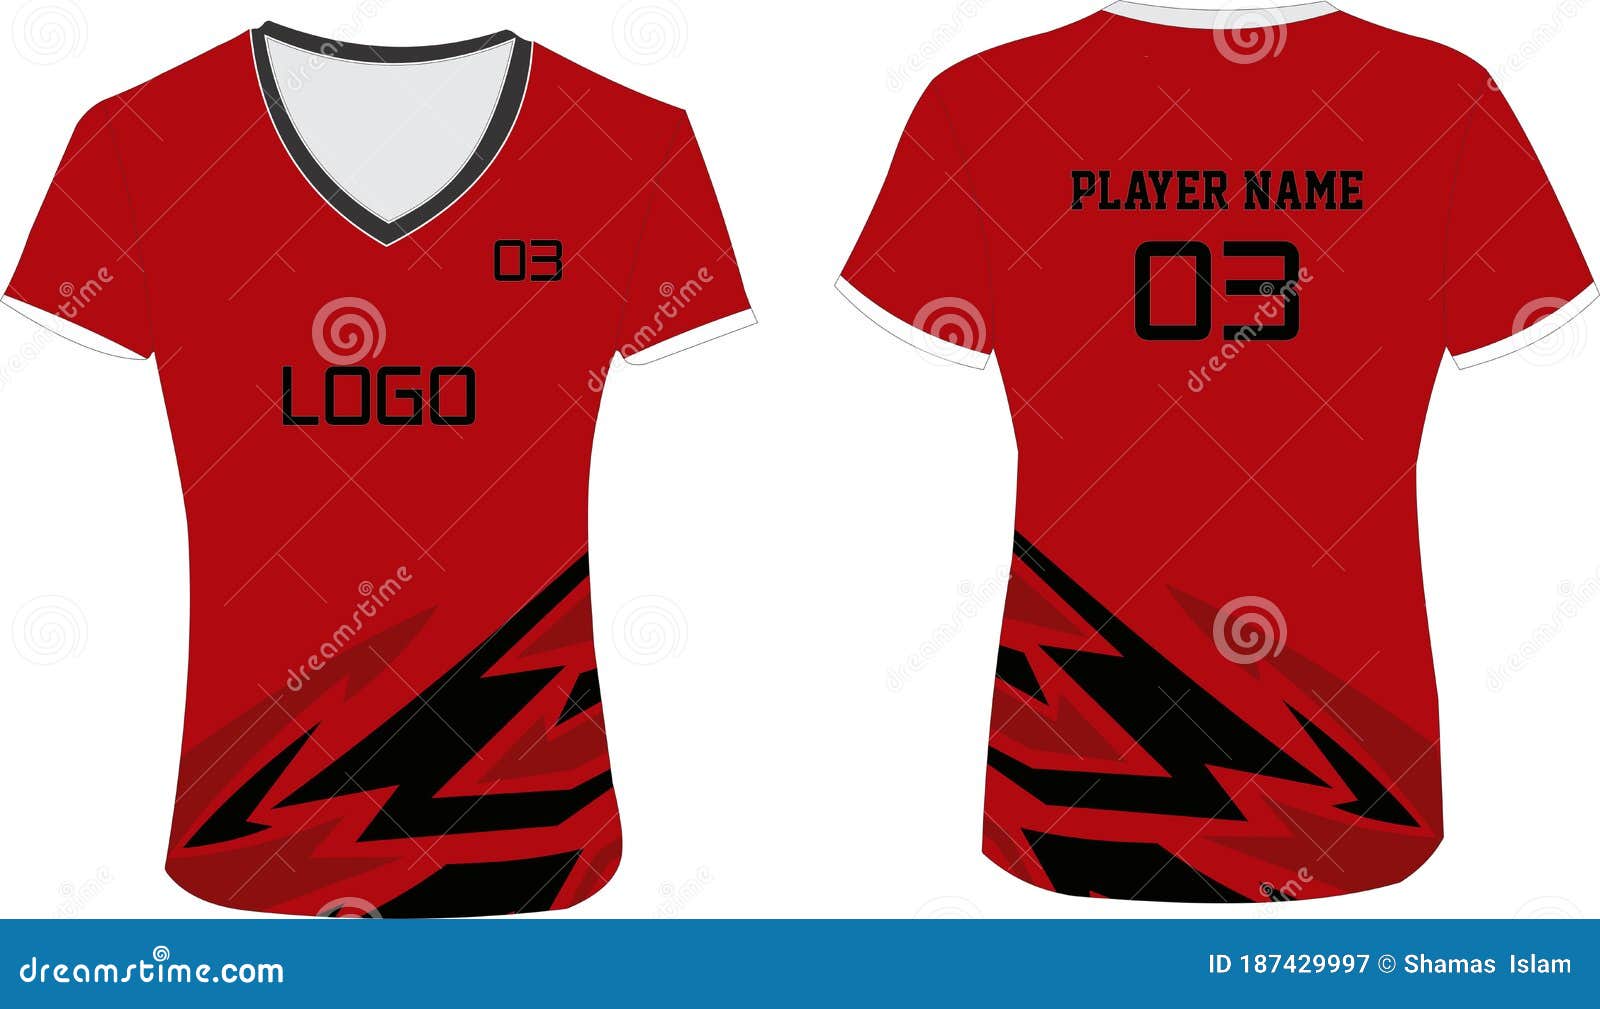 Download Women S Custom Design Sublimated Volleyball Jersey Mock Up Templates Illustrations Stock Vector Illustration Of Fabric Fashion 187429997